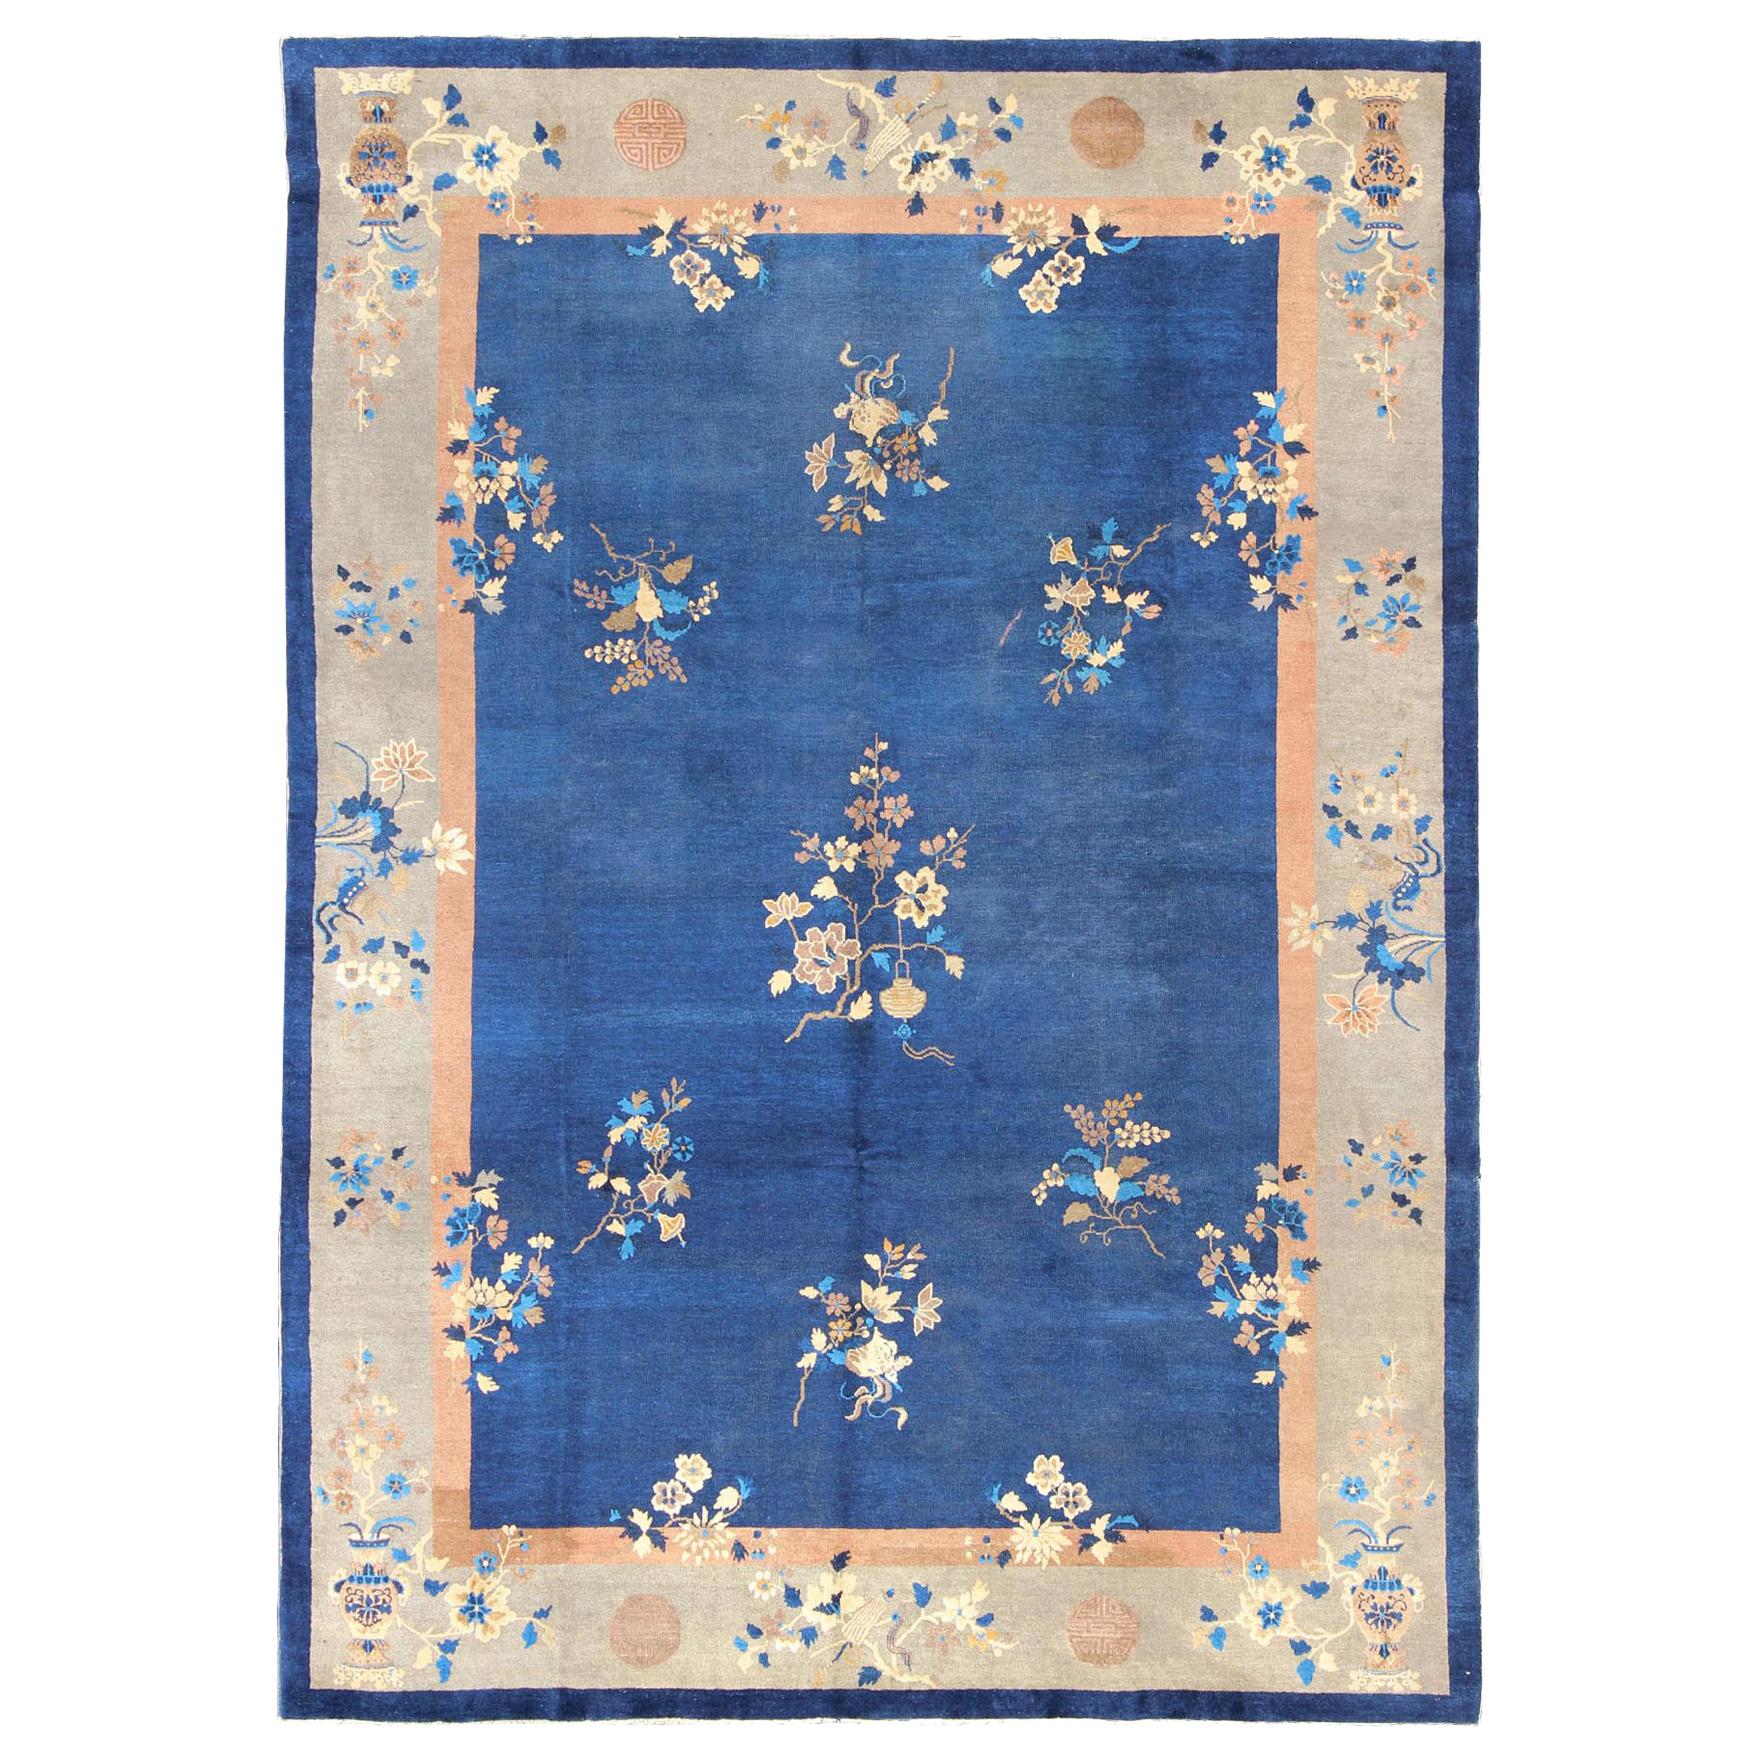 Large Antique Chinese Pecking Rug with Flowers and Vases in Navy Blue and Tan